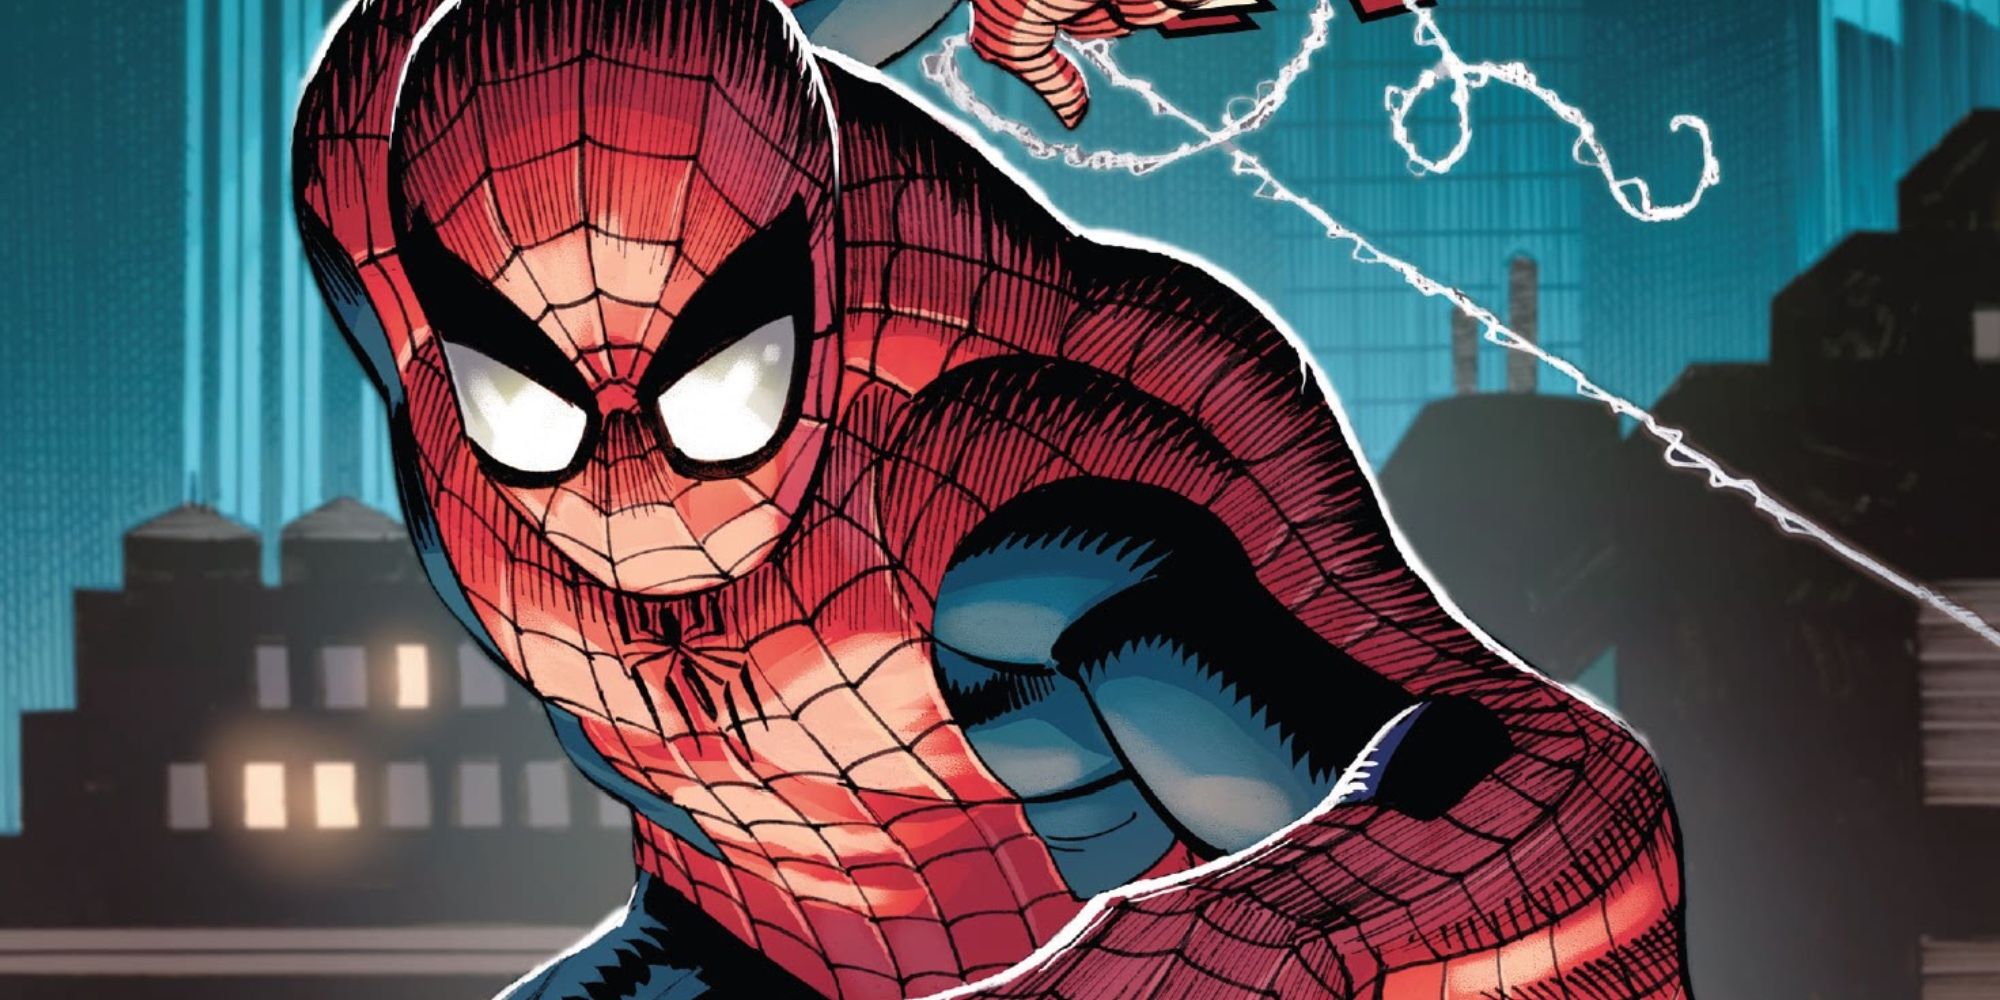 Marvel's Spider-Man Relaunch is a Surprise (But Not a Good One)